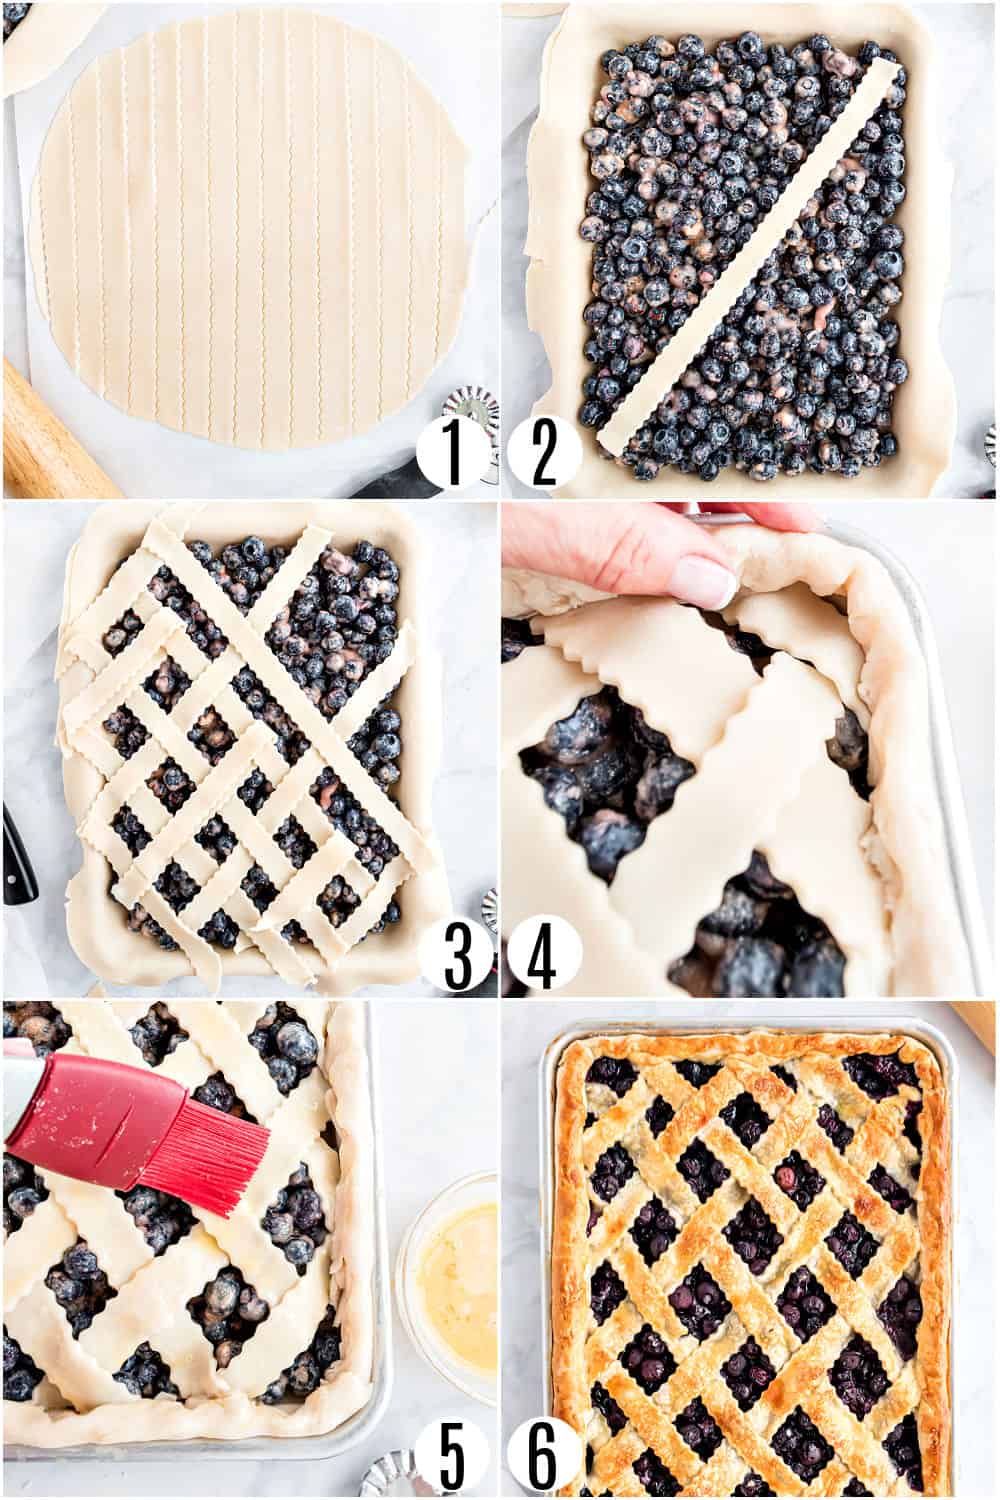 Step by step photos showing how to create a lattice pie crust for a slab pie.